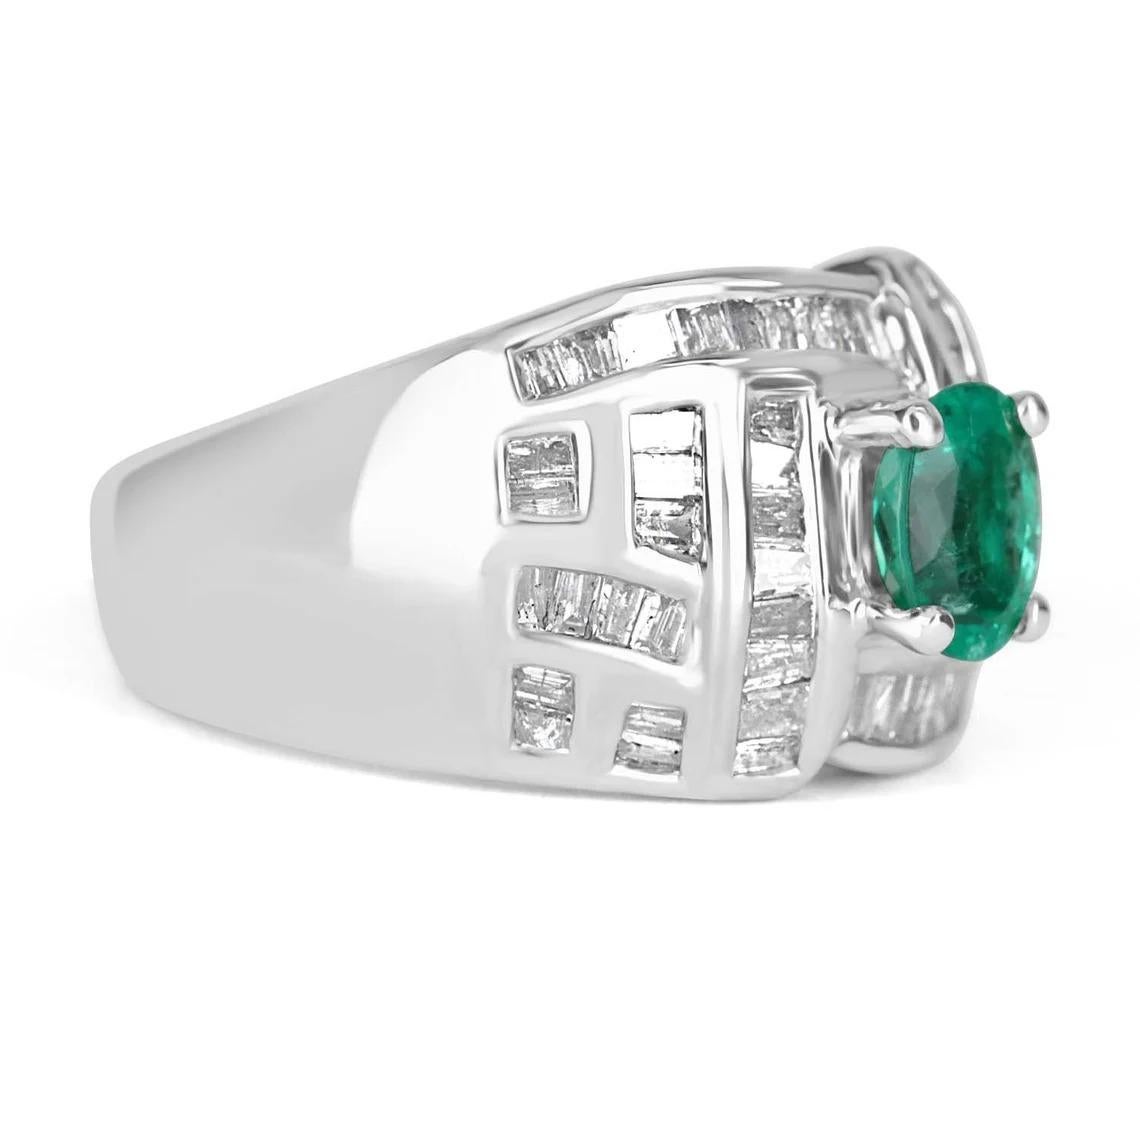 Setting Style: Bezel/Prong
Setting Material: 18K White Gold
Weight: 8.5 Grams

Main Stone: Emerald
Shape: Oval Cut
Approx Weight: 0.55-Carats
Color: Green
Clarity: Semi-Transparent
Luster: Excellent-Very Good
Treatments: Natural, Oiling
Origin: